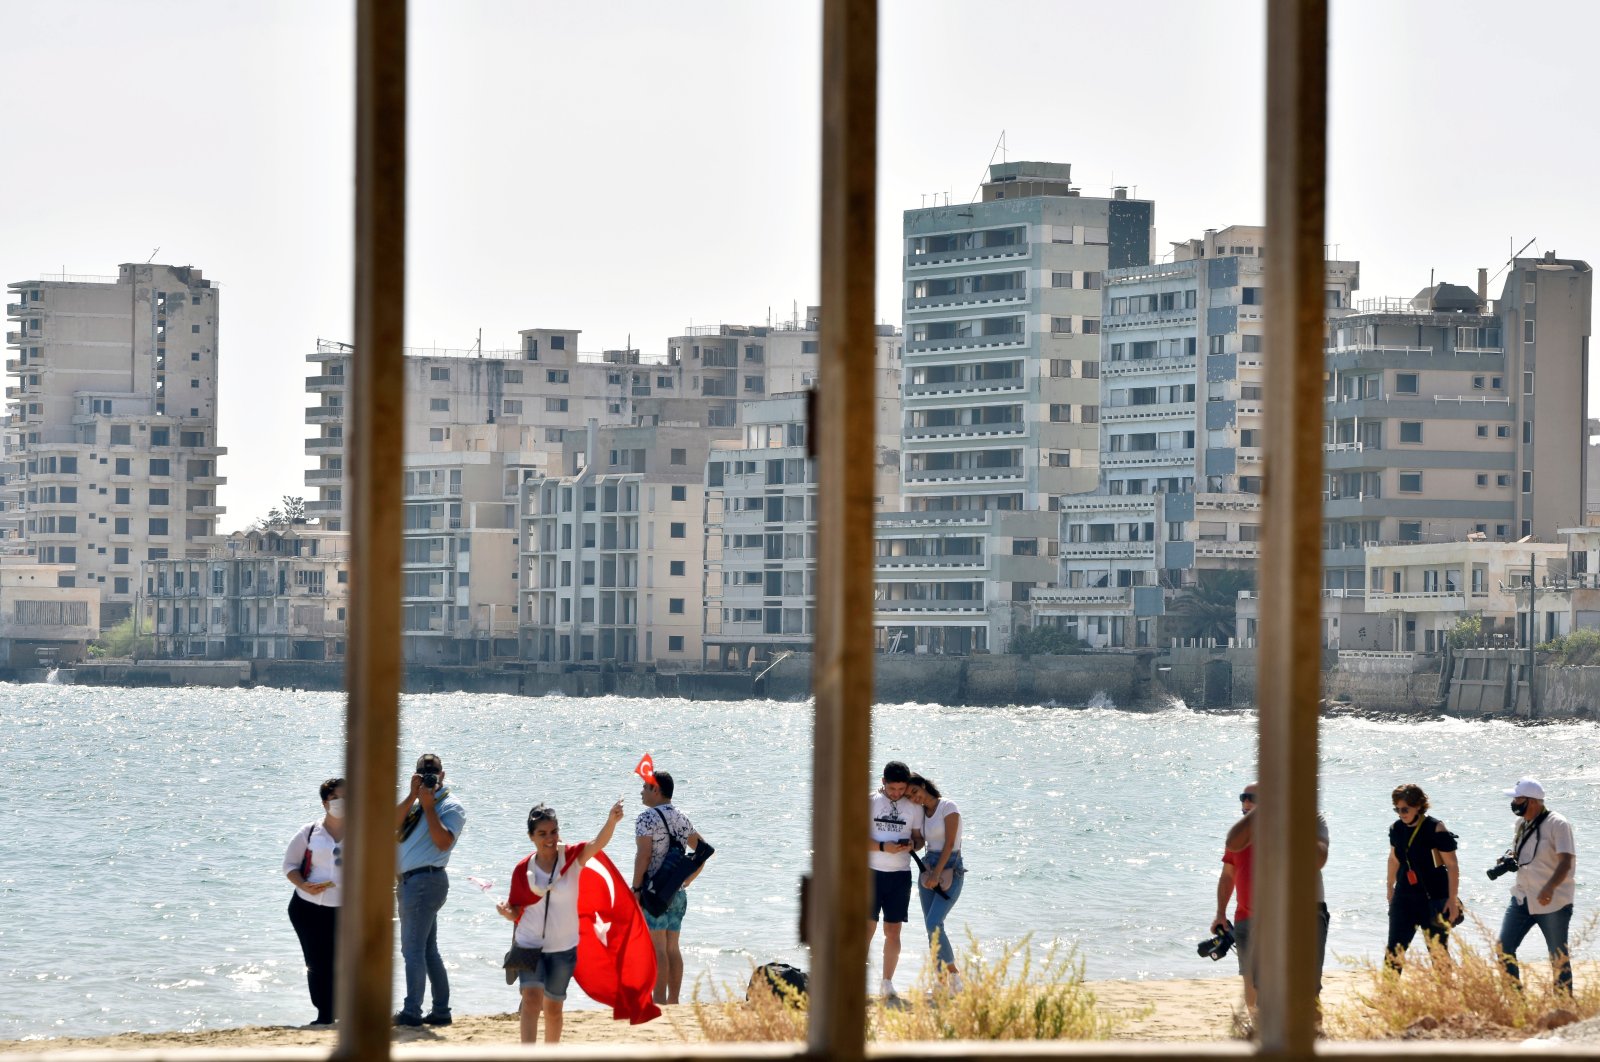 People walk on a beach inside an area fenced off by the Turkish military since 1974 in the abandoned coastal area of Varosha, TRNC, Oct. 8, 2020. (REUTERS Photo)